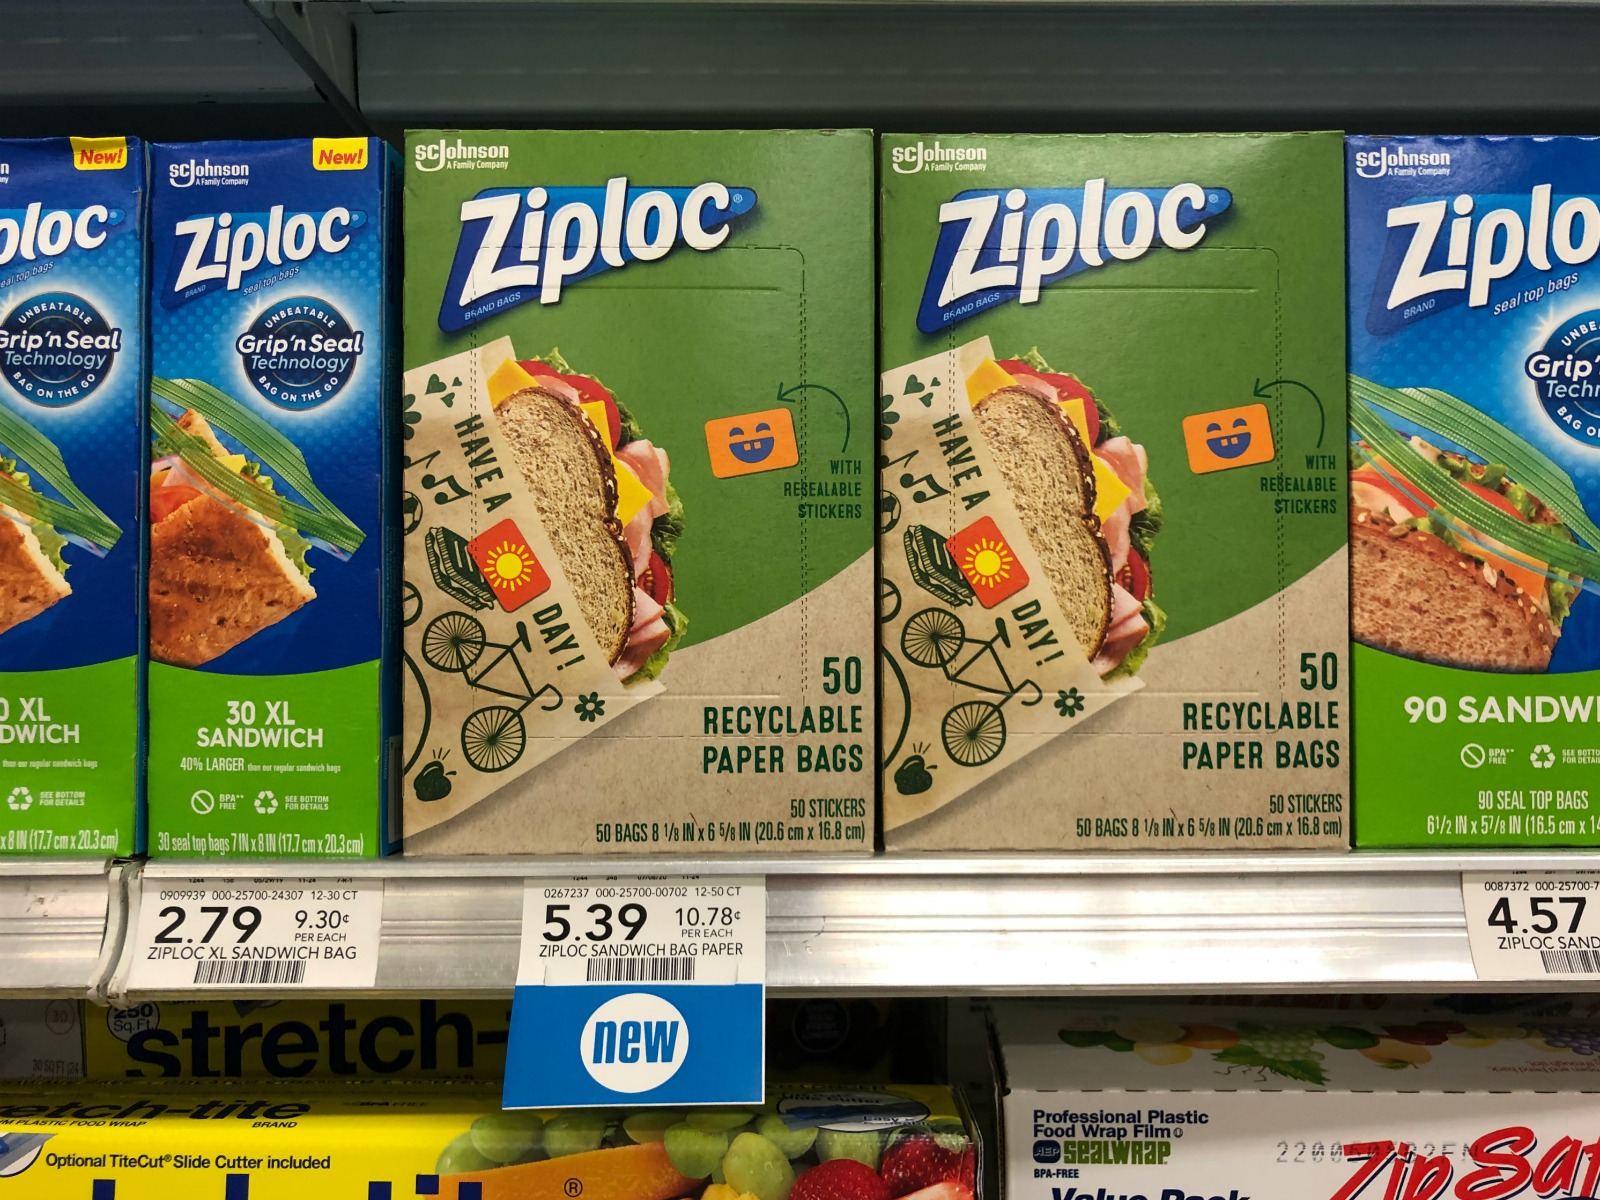 Look For New Ziploc® Paper Bags At Publix - Recyclable, Resealable & Reusable Bags With Fun Designs! on I Heart Publix